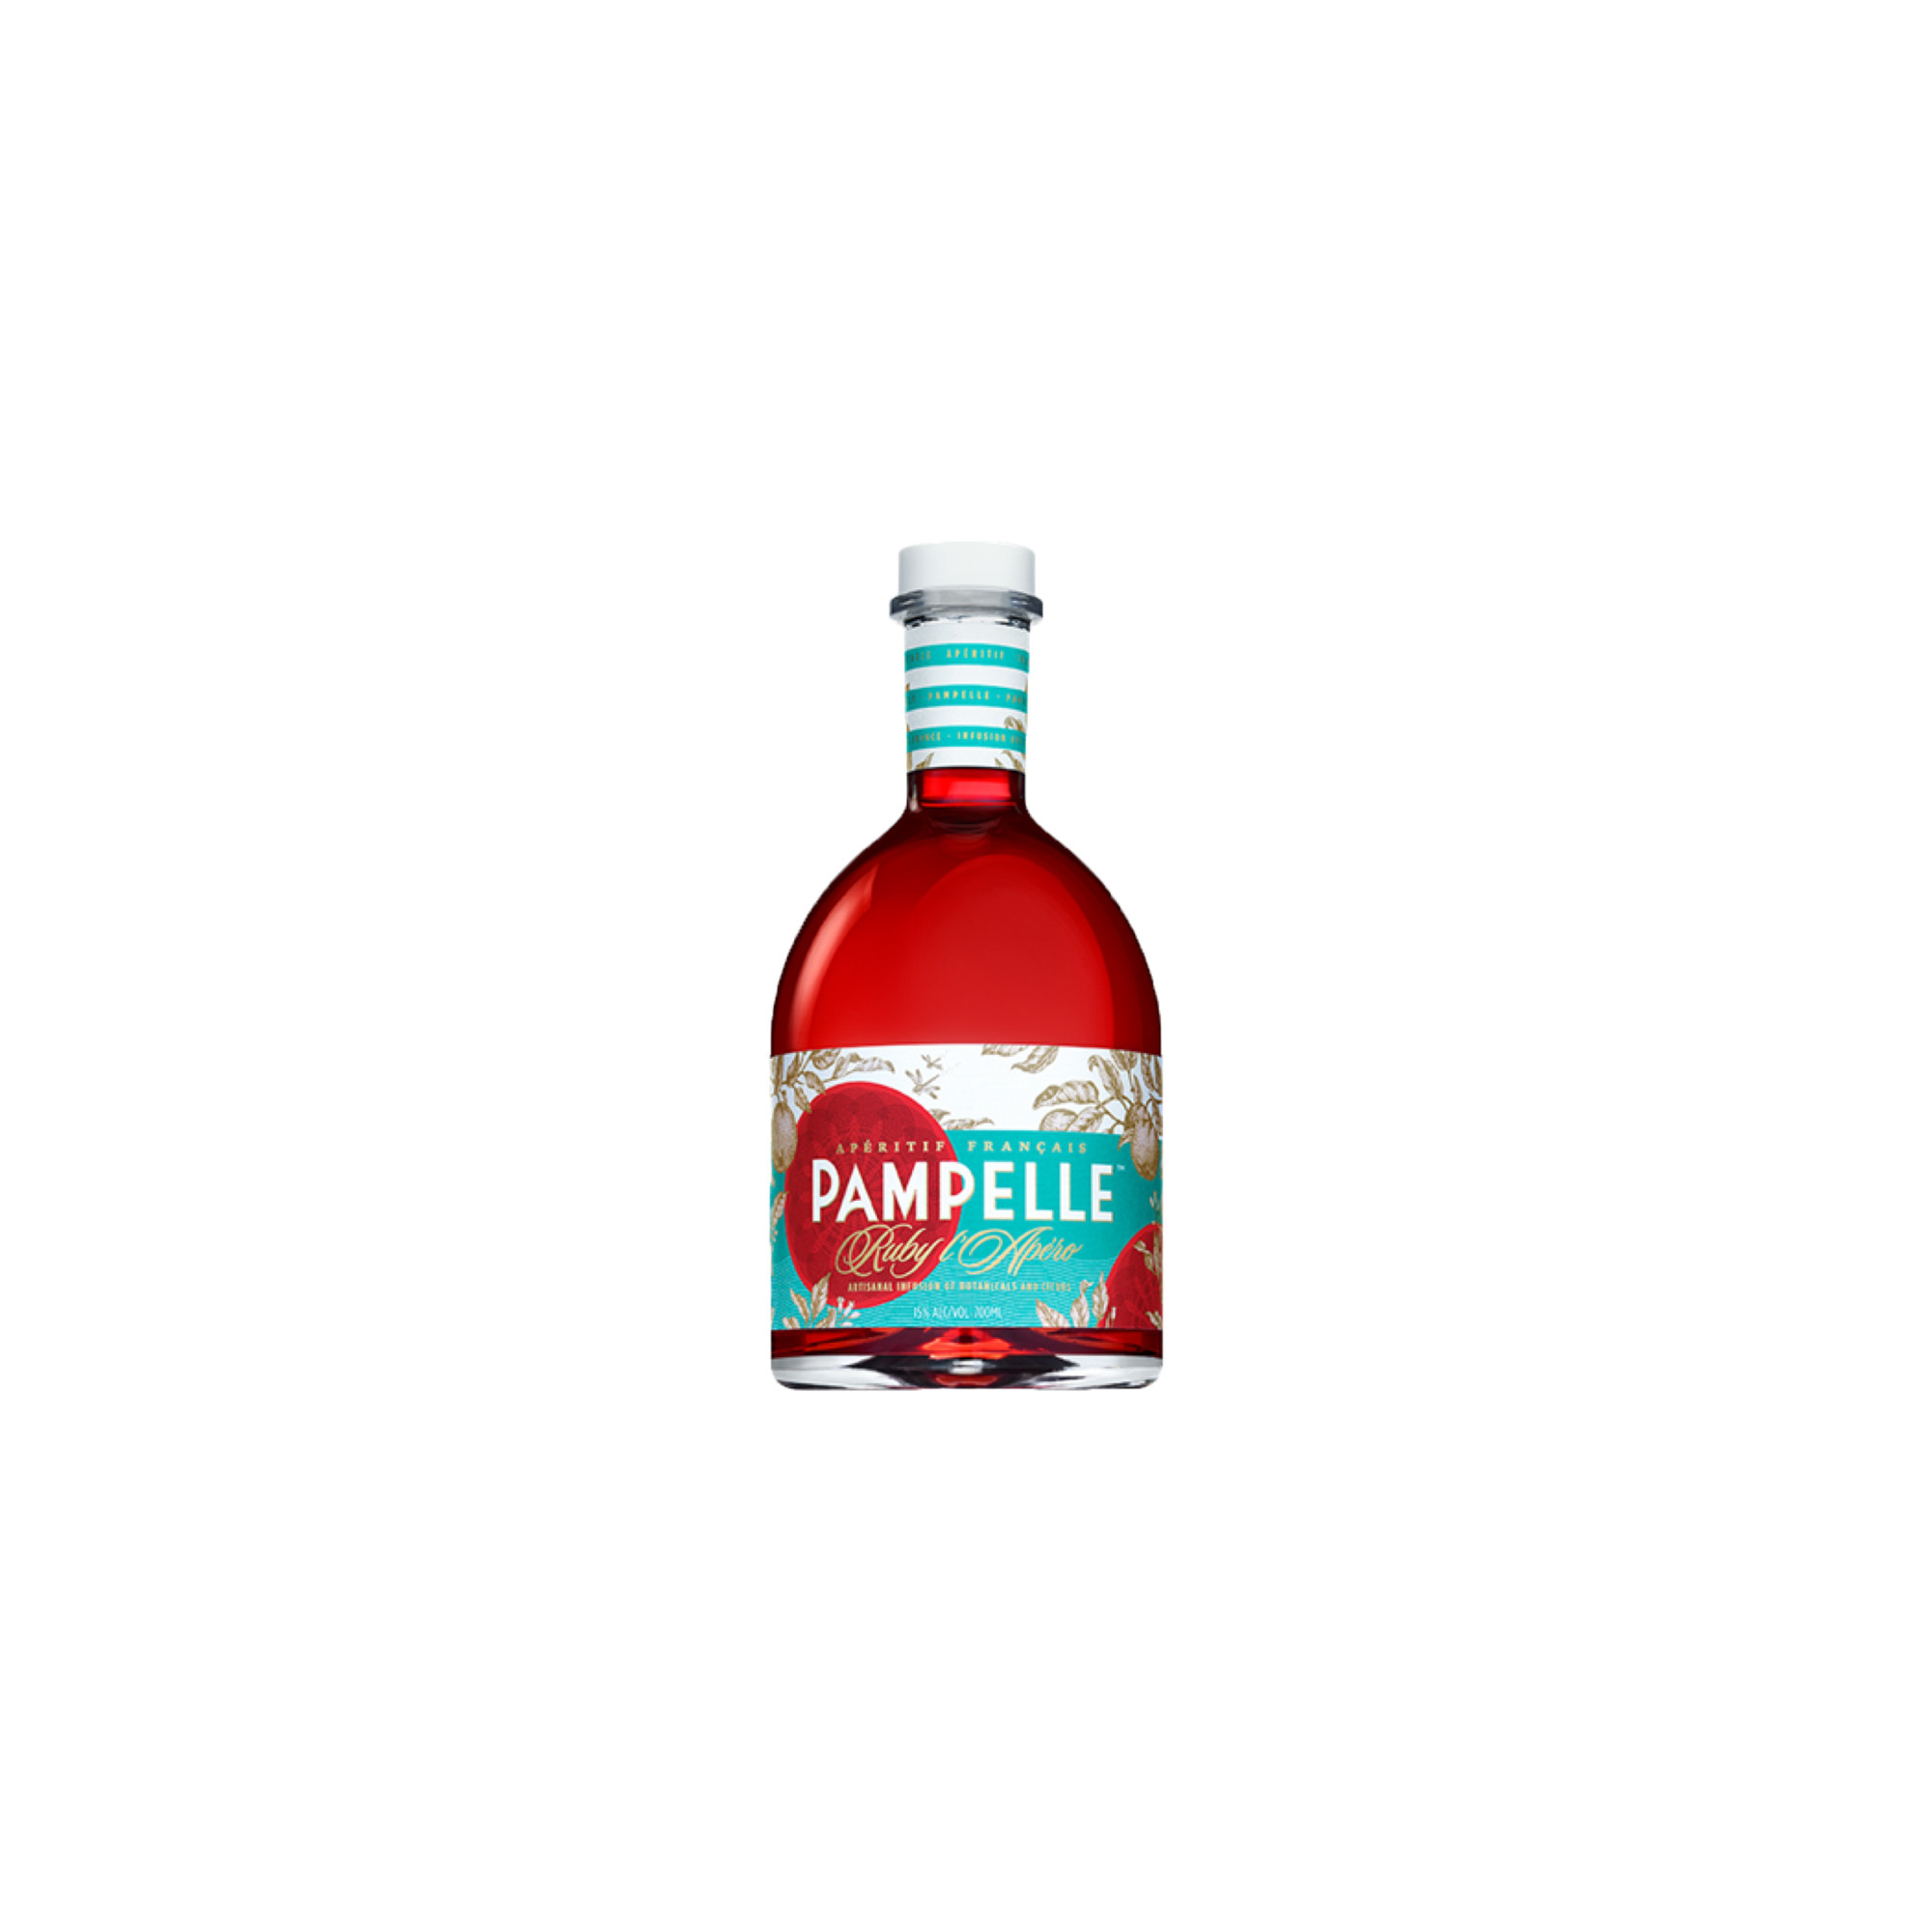 Pampelle Ruby l'Apero 0,7l